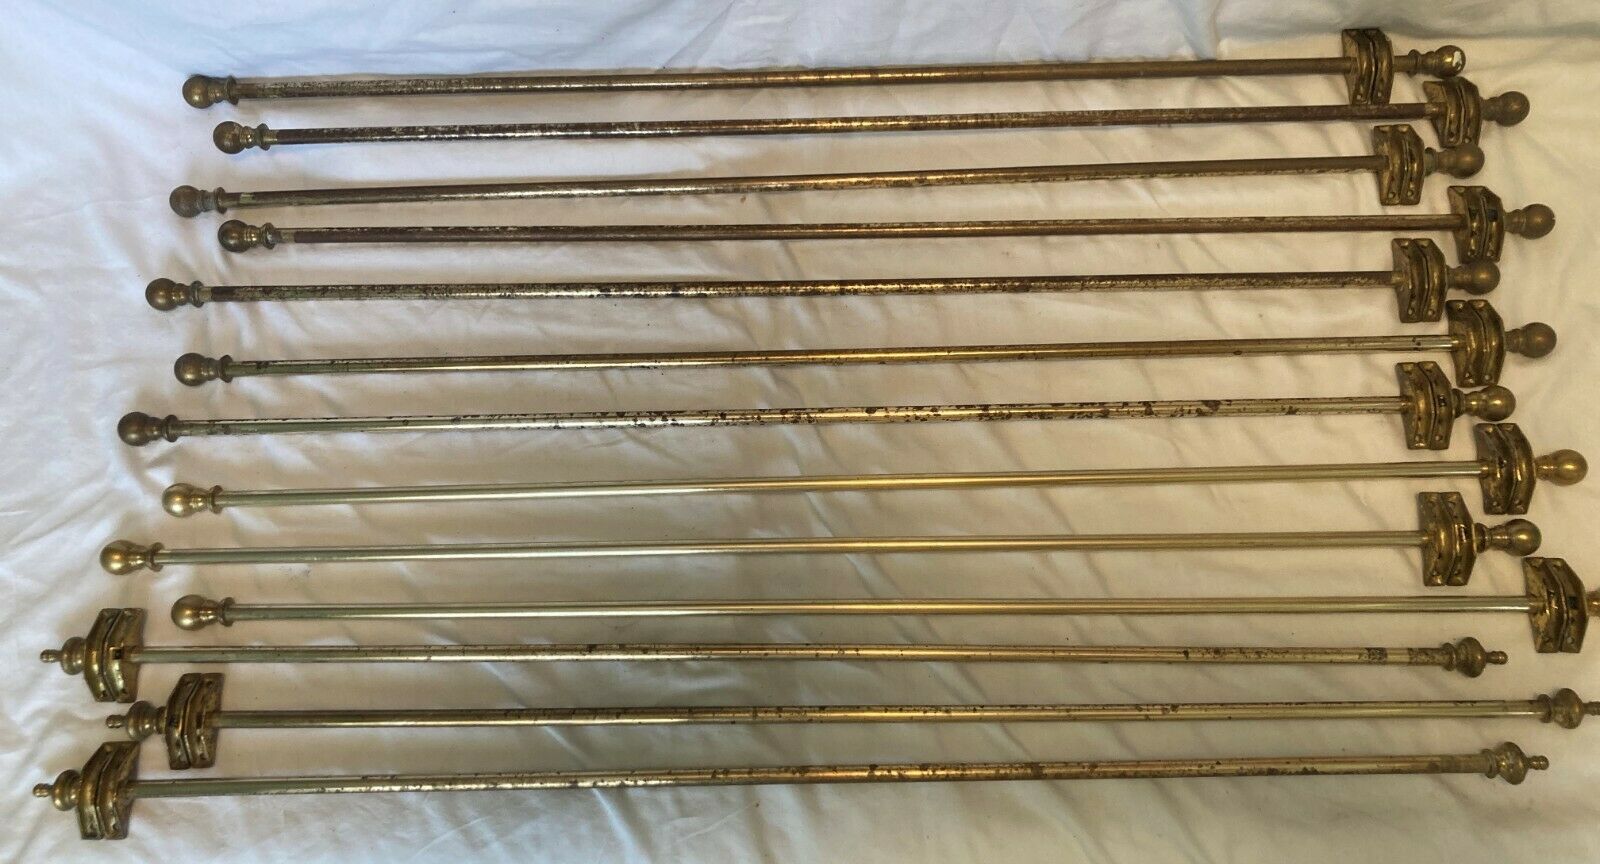 Vintage Brass Stair Rods Lot Of 13 ( 3 Have Different Finials) - Used, Tarnished